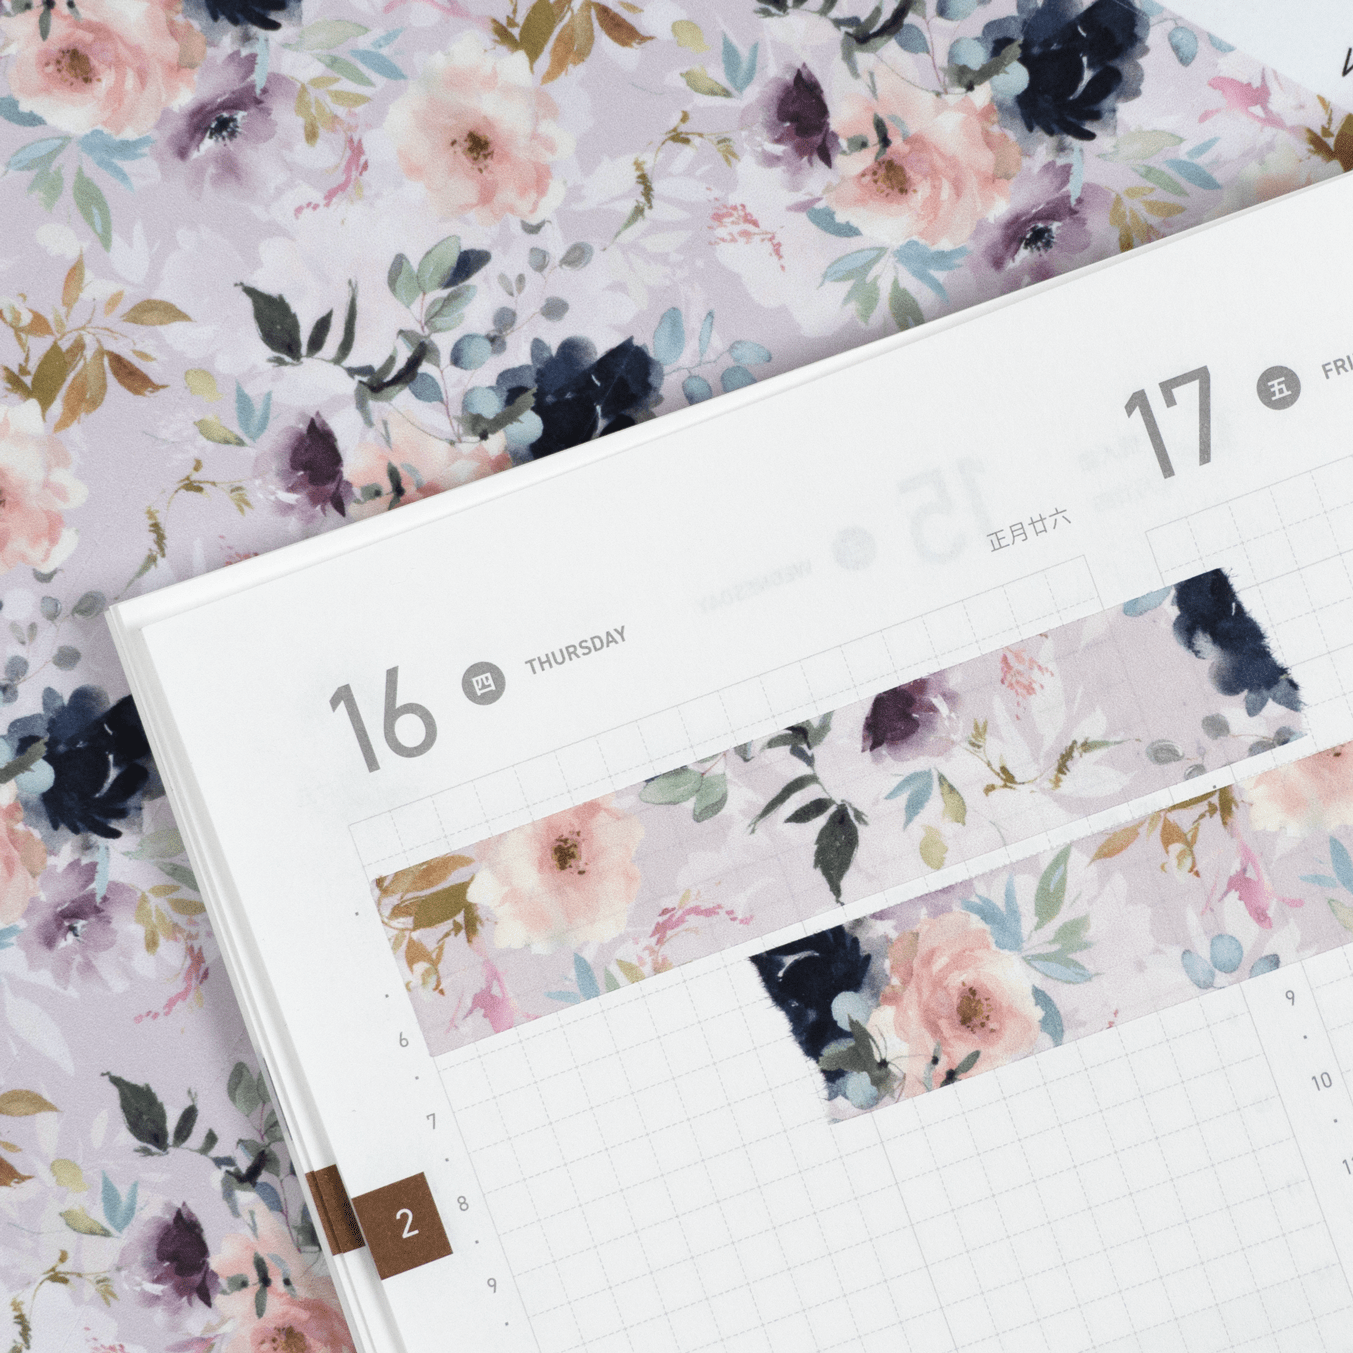 Nude & Navy Floral | Washi Tape Strips by Plannerface